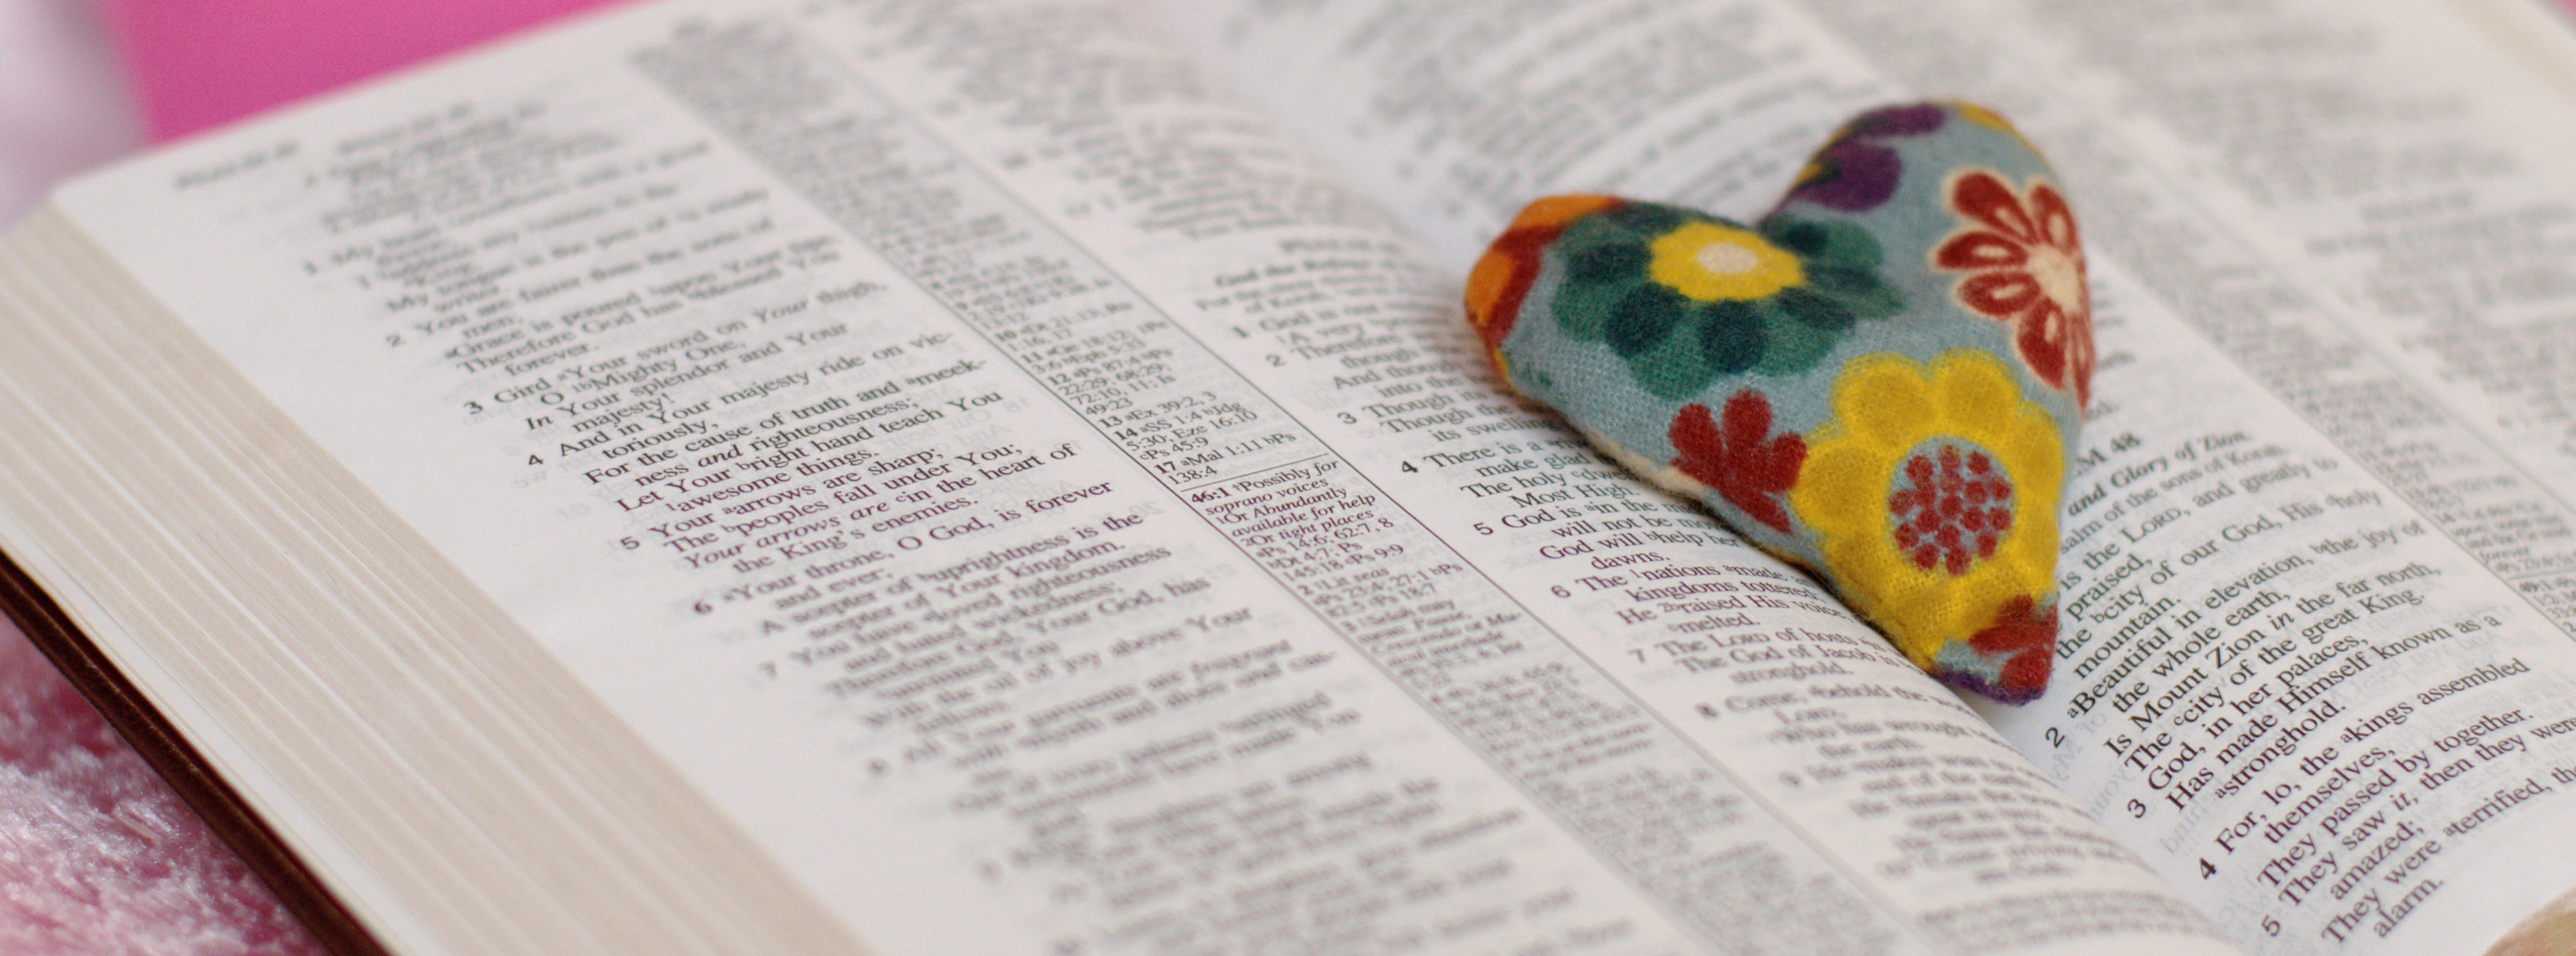 Quilted-heart-paperweight-on-Bible_660x245